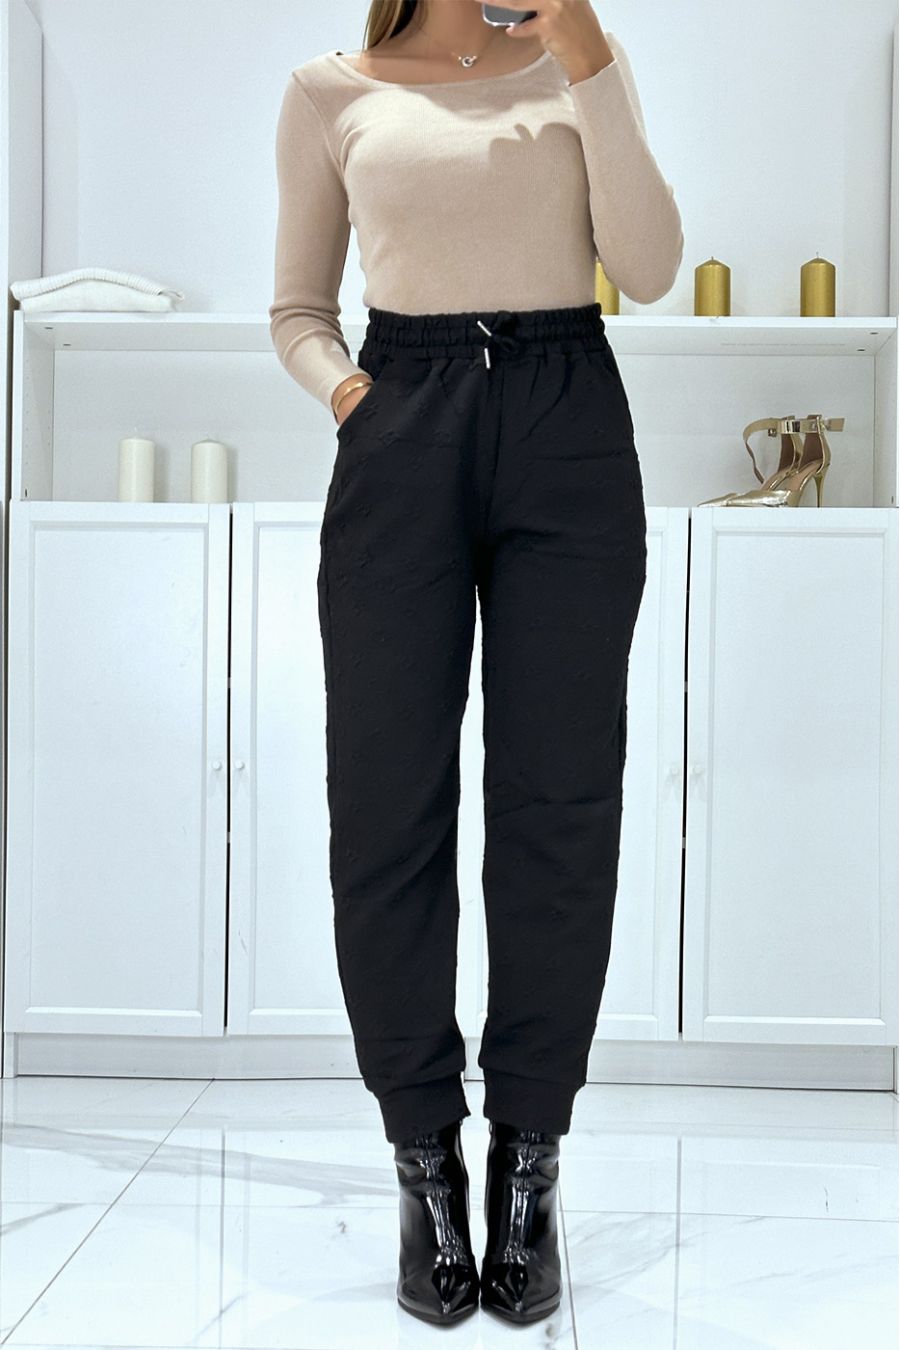 Ladies Cigarette Pants, Waist Size: 28.0 at Rs 275/piece in